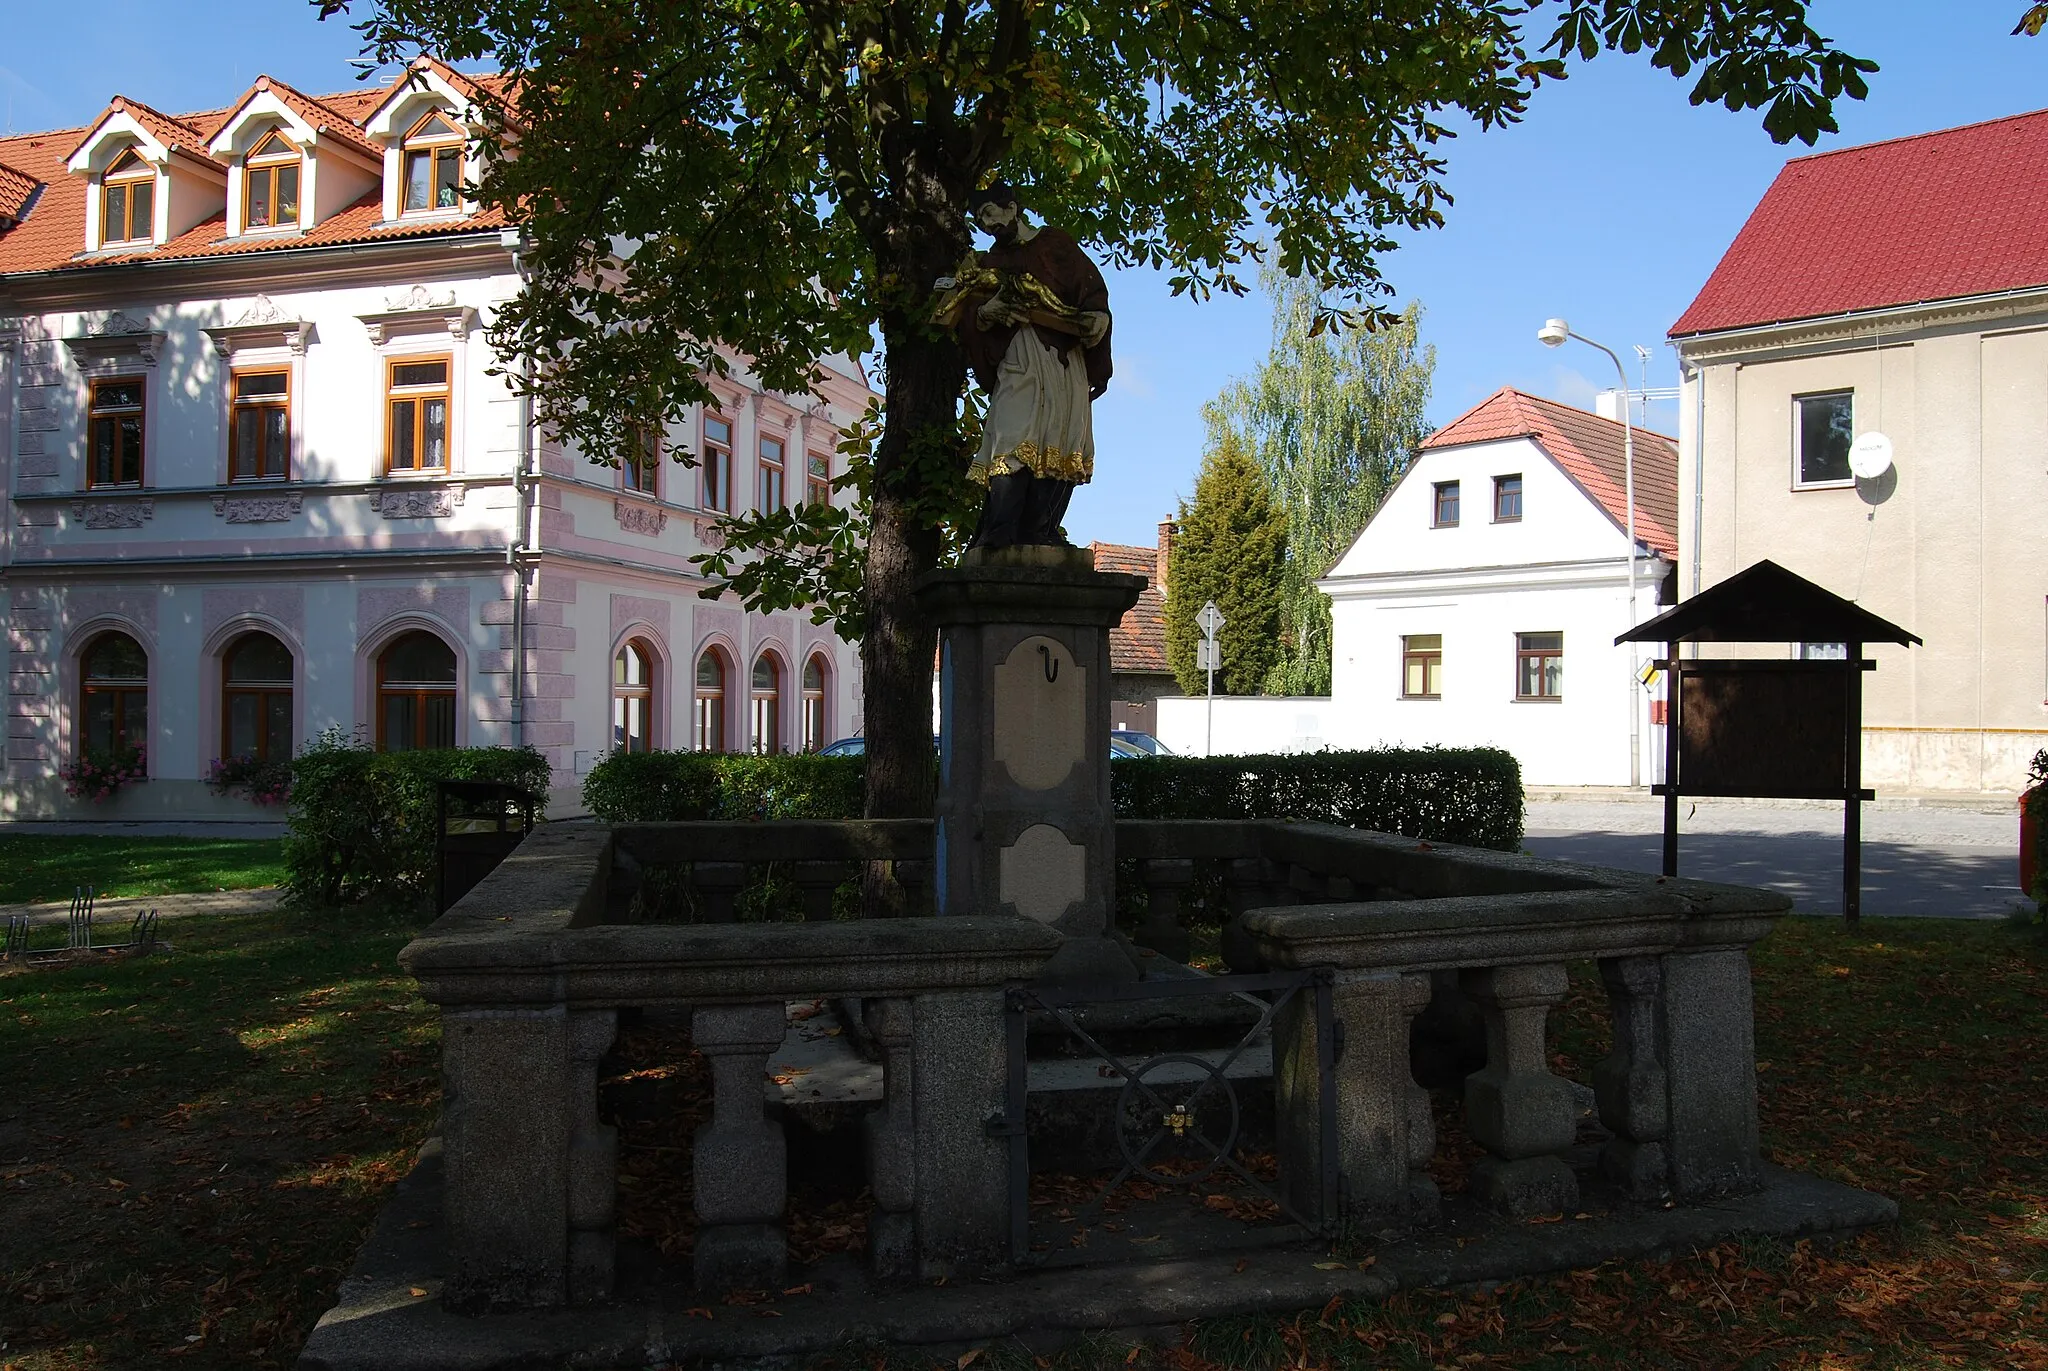 Photo showing: Sedlice town in Strakonice District, Czech Republic. Statue of St. John of Nepomuk on the T. G. Masaryk square